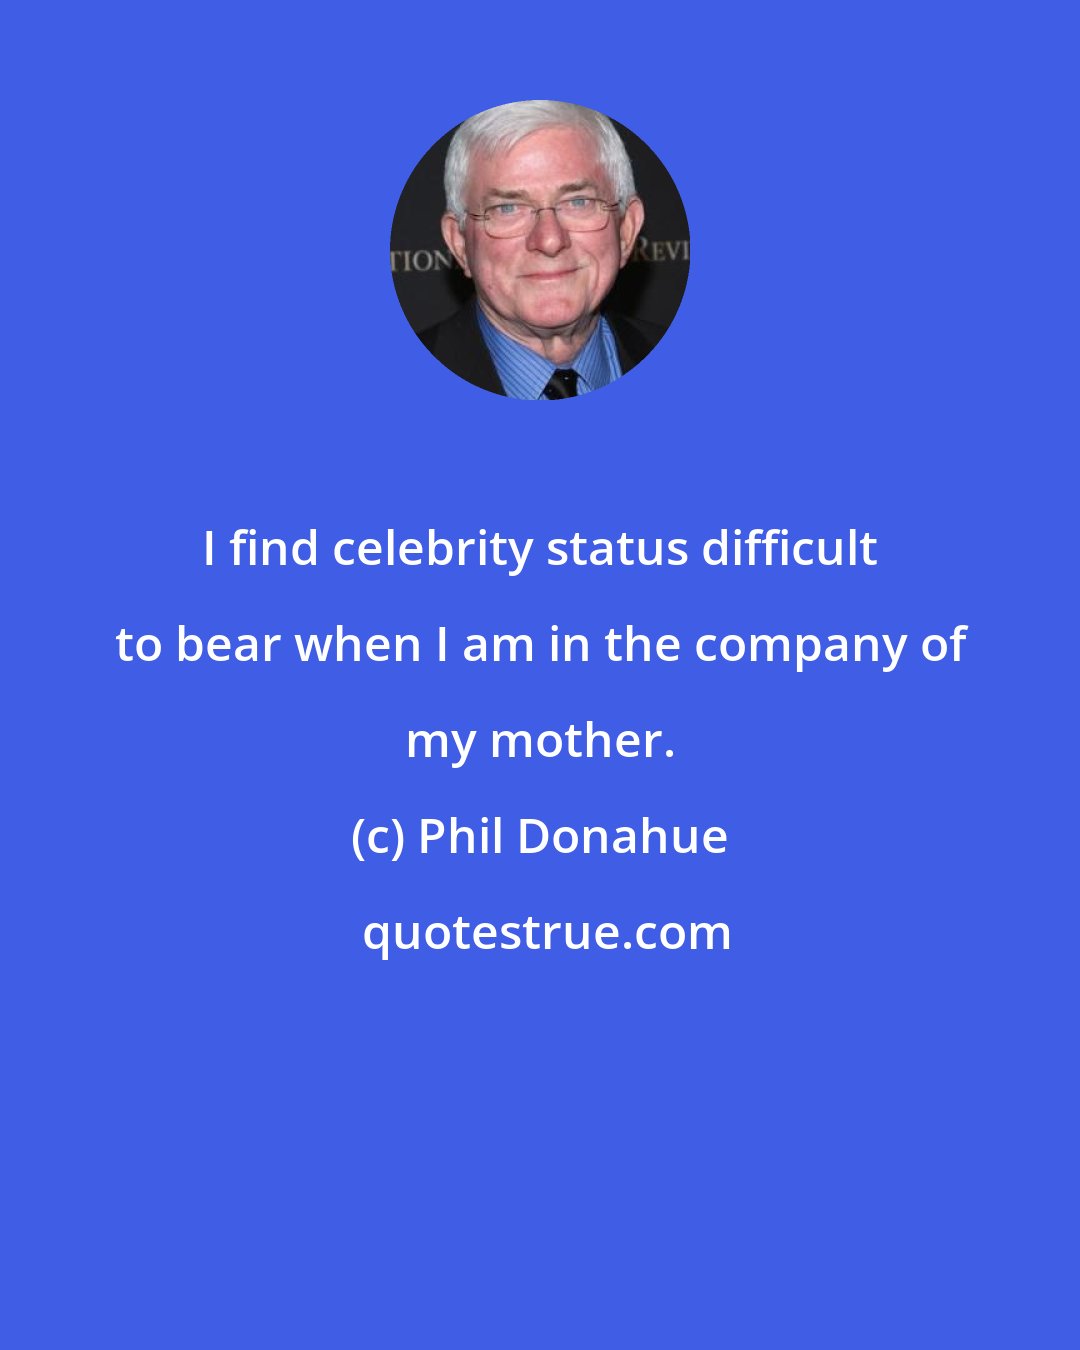 Phil Donahue: I find celebrity status difficult to bear when I am in the company of my mother.